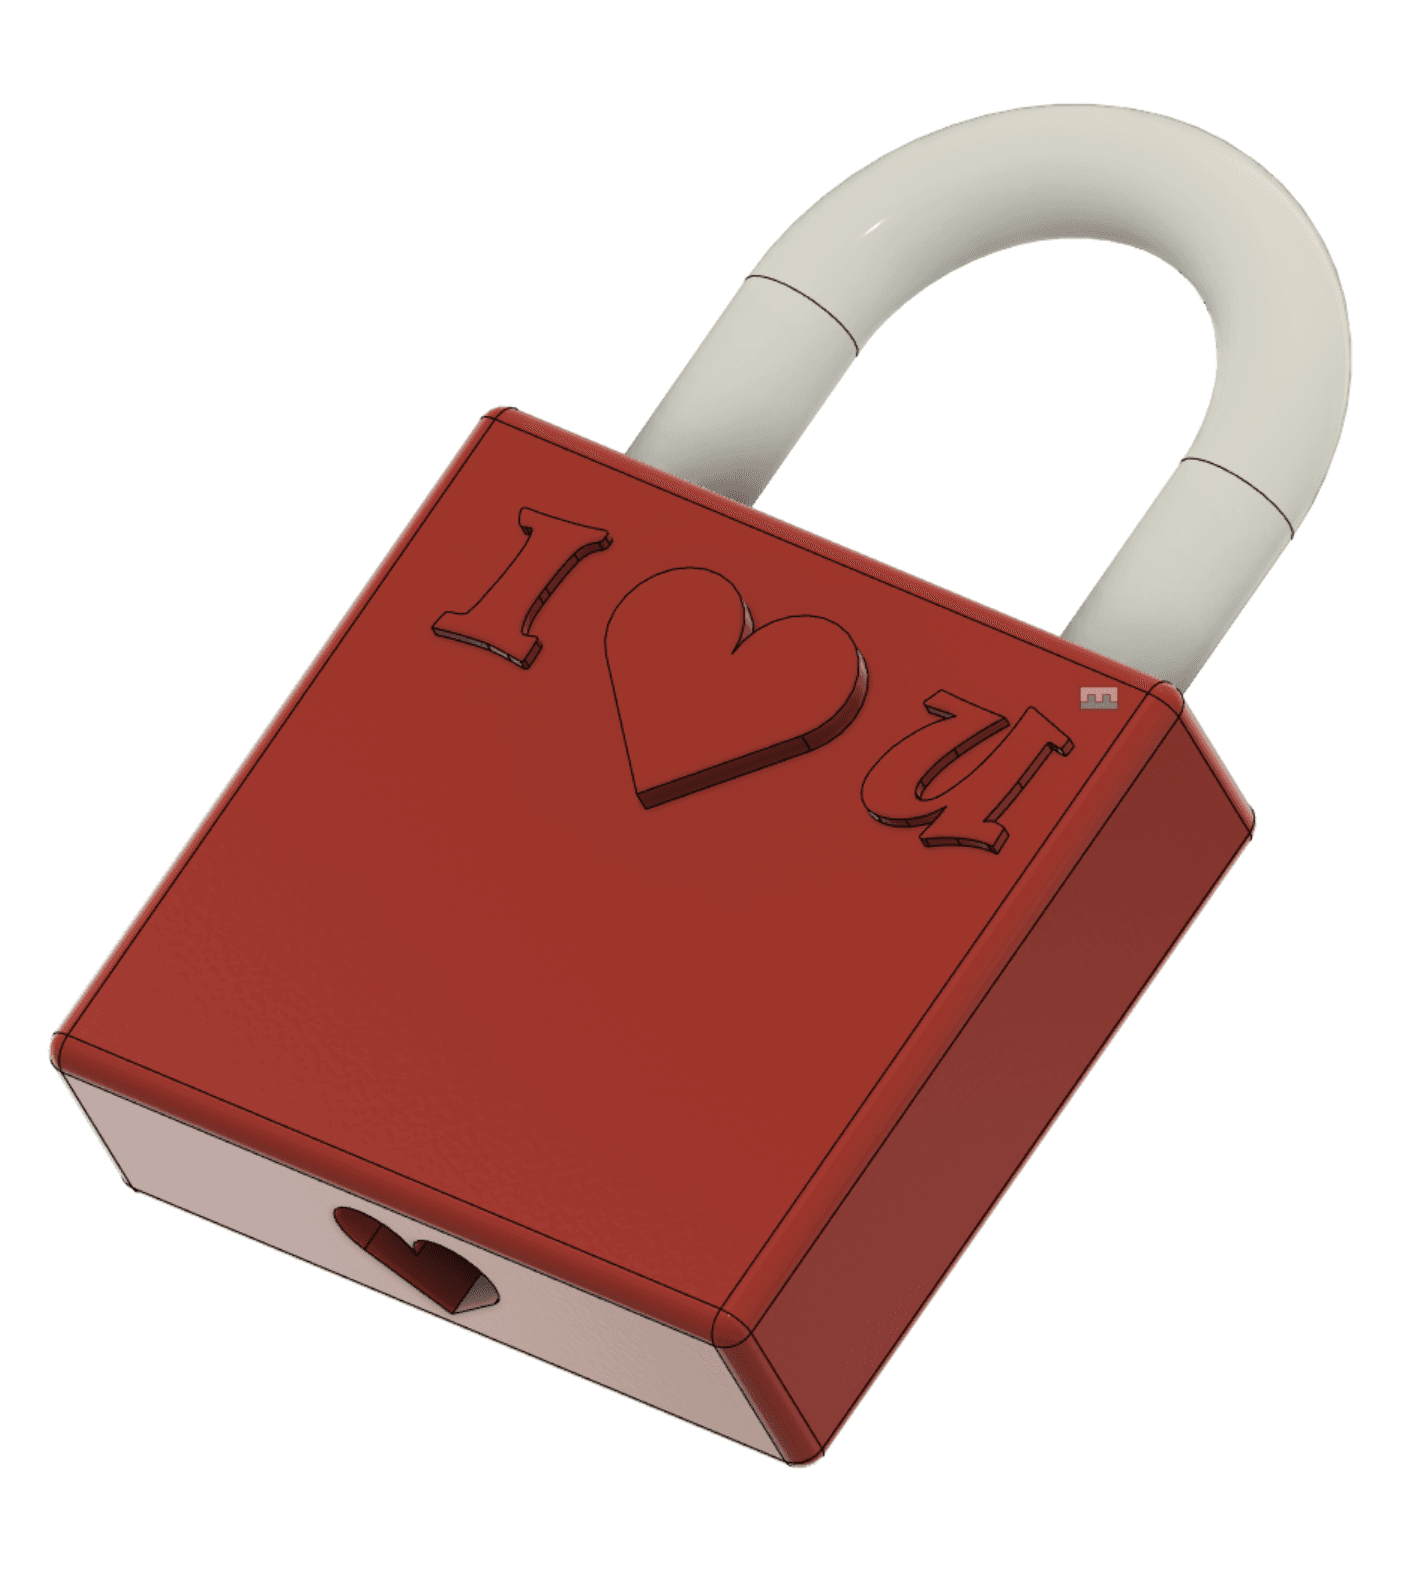 Remix of Blank Love Locks for Remixing 3d model